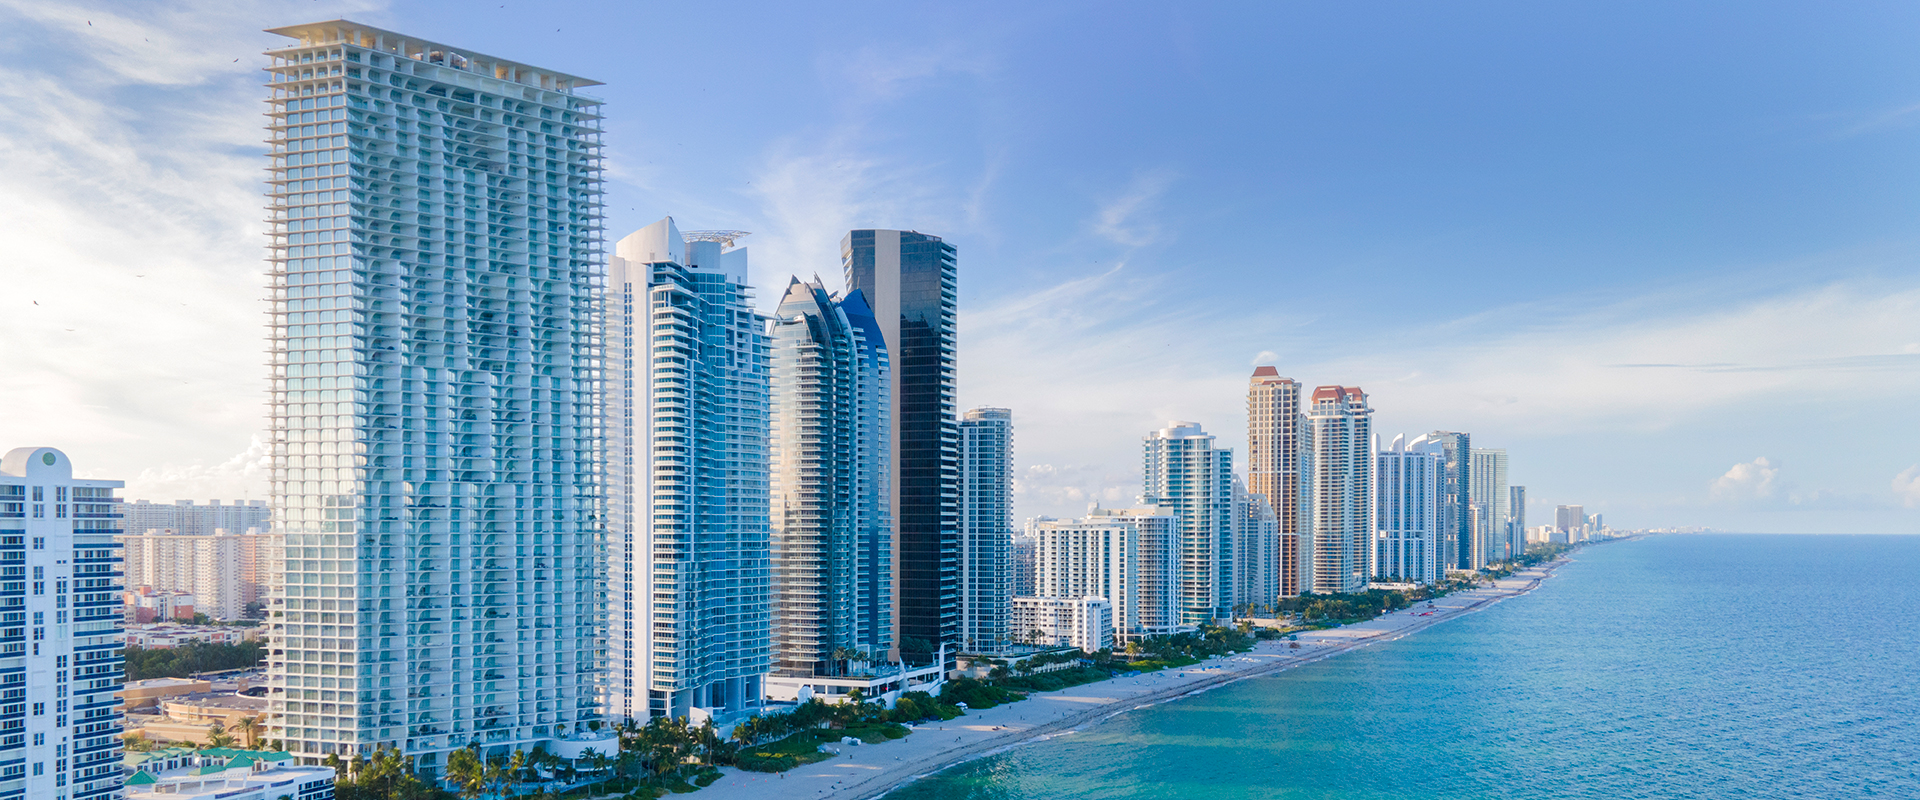 Sunny Isles Beach Aerial view of hotels and beach